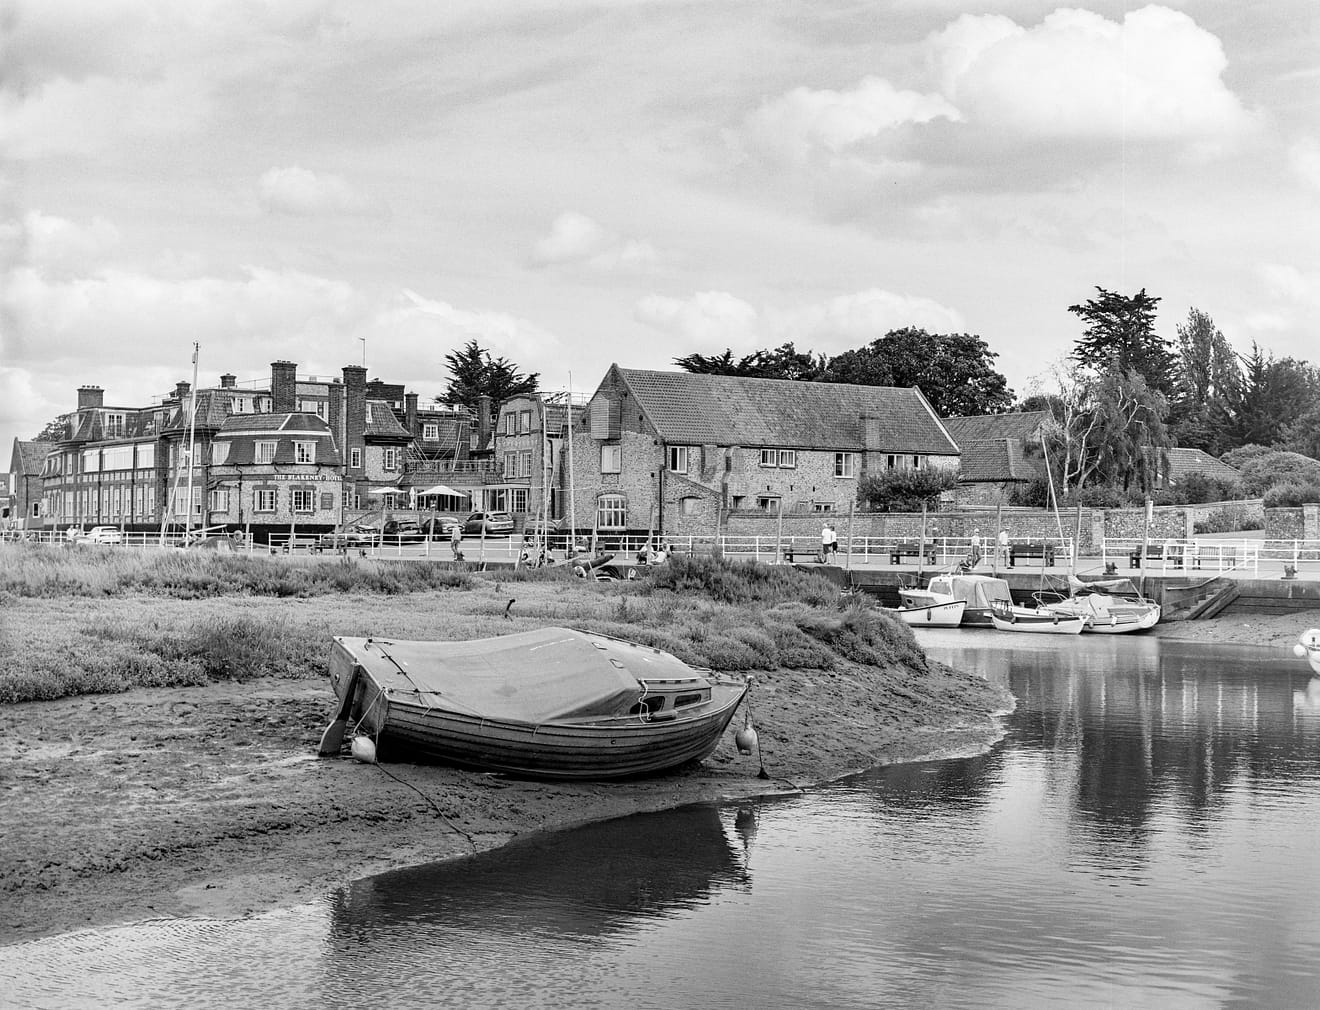 Exploring Blakeney Quay with Ilford FP4+ and Bronica ETRSi